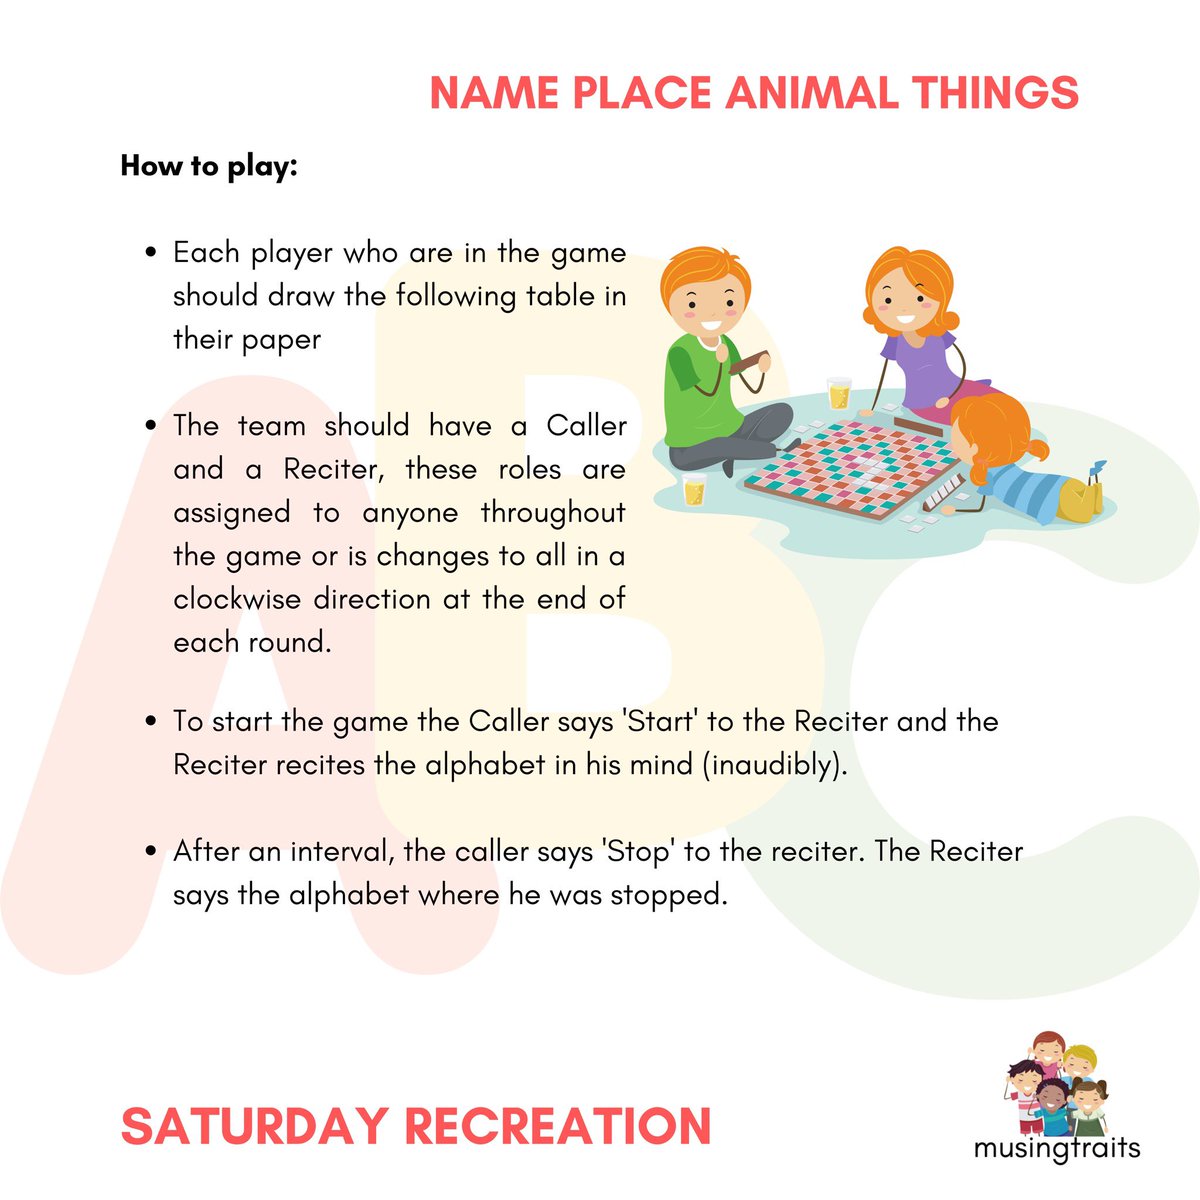 By playing this game, the kids come to know different Names, Places, Animals, and Things starting in all the alphabets. This helps them practice nouns in alphabets.

#TheMagicInEveryDay #children  #thechildrenoftheworld  #childrenseemagic  @canva #traditionalgames